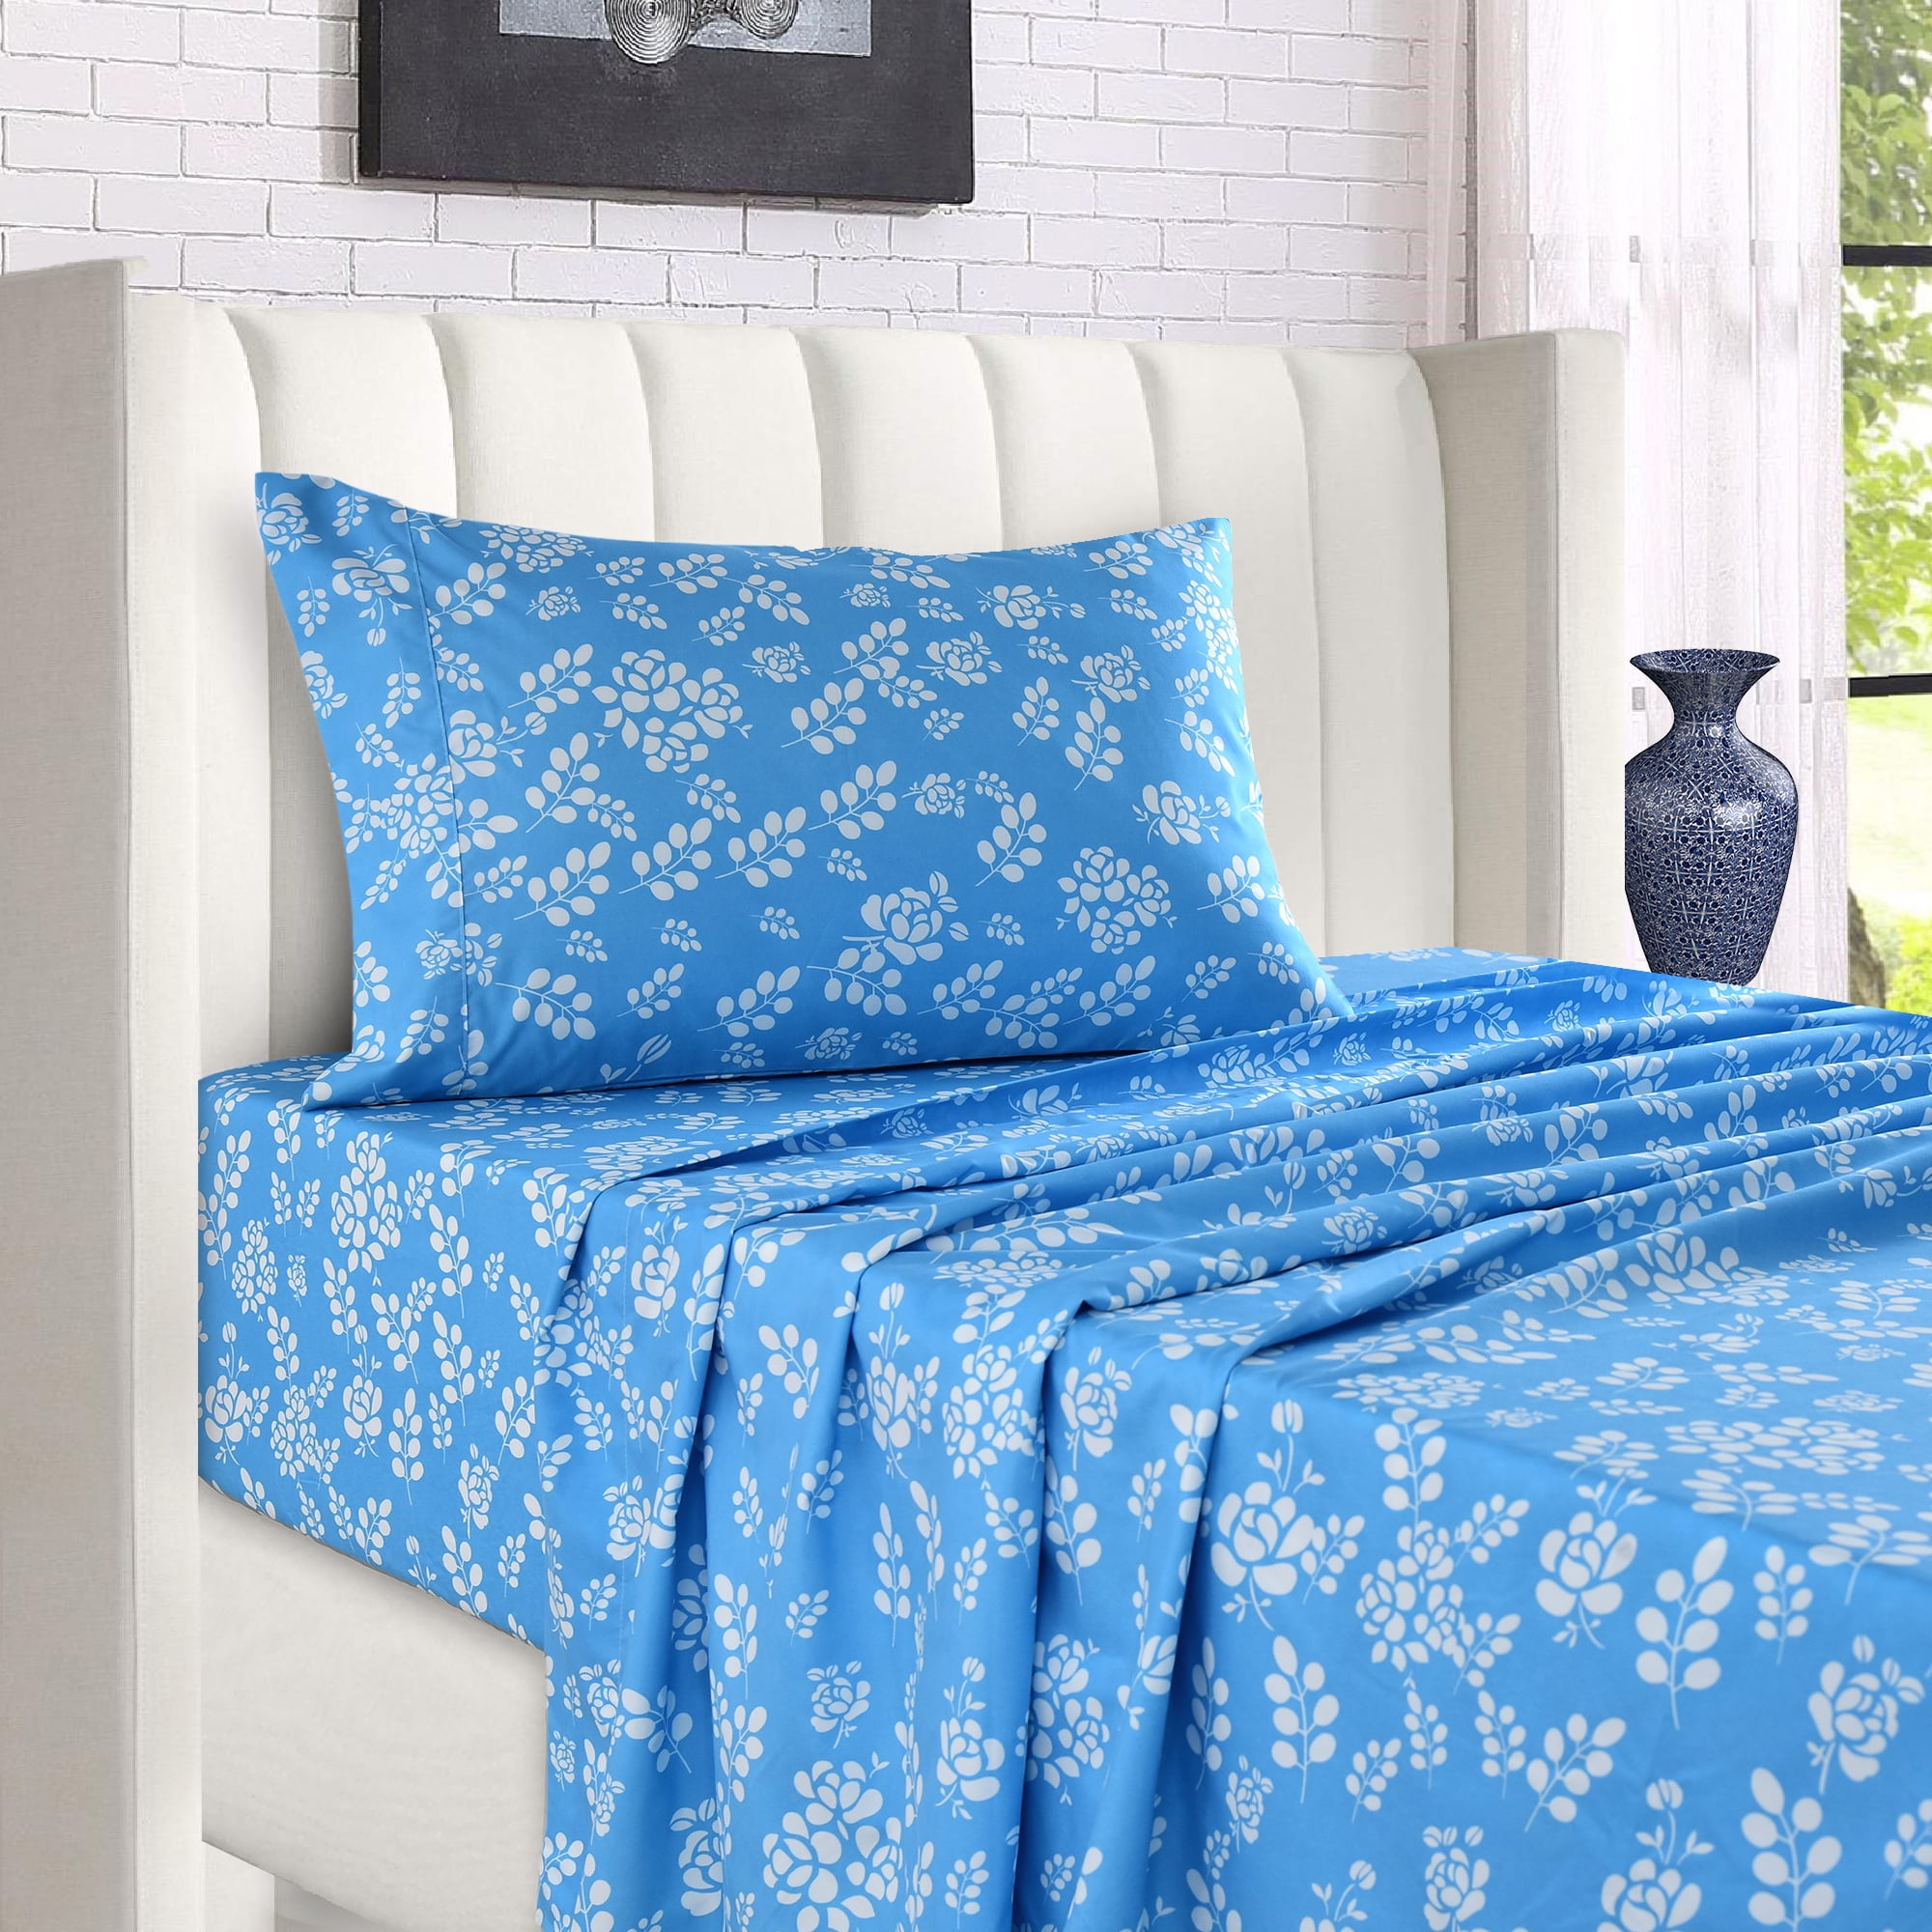 Lux Decor Collection Premium 3 PC Bed Sheet Set 1800 Microfiber Bedding  Sheets - Super Soft, Warm, Breathable, Cooling, Wrinkle Free Twin Sheets -  Blue - Walmart.com